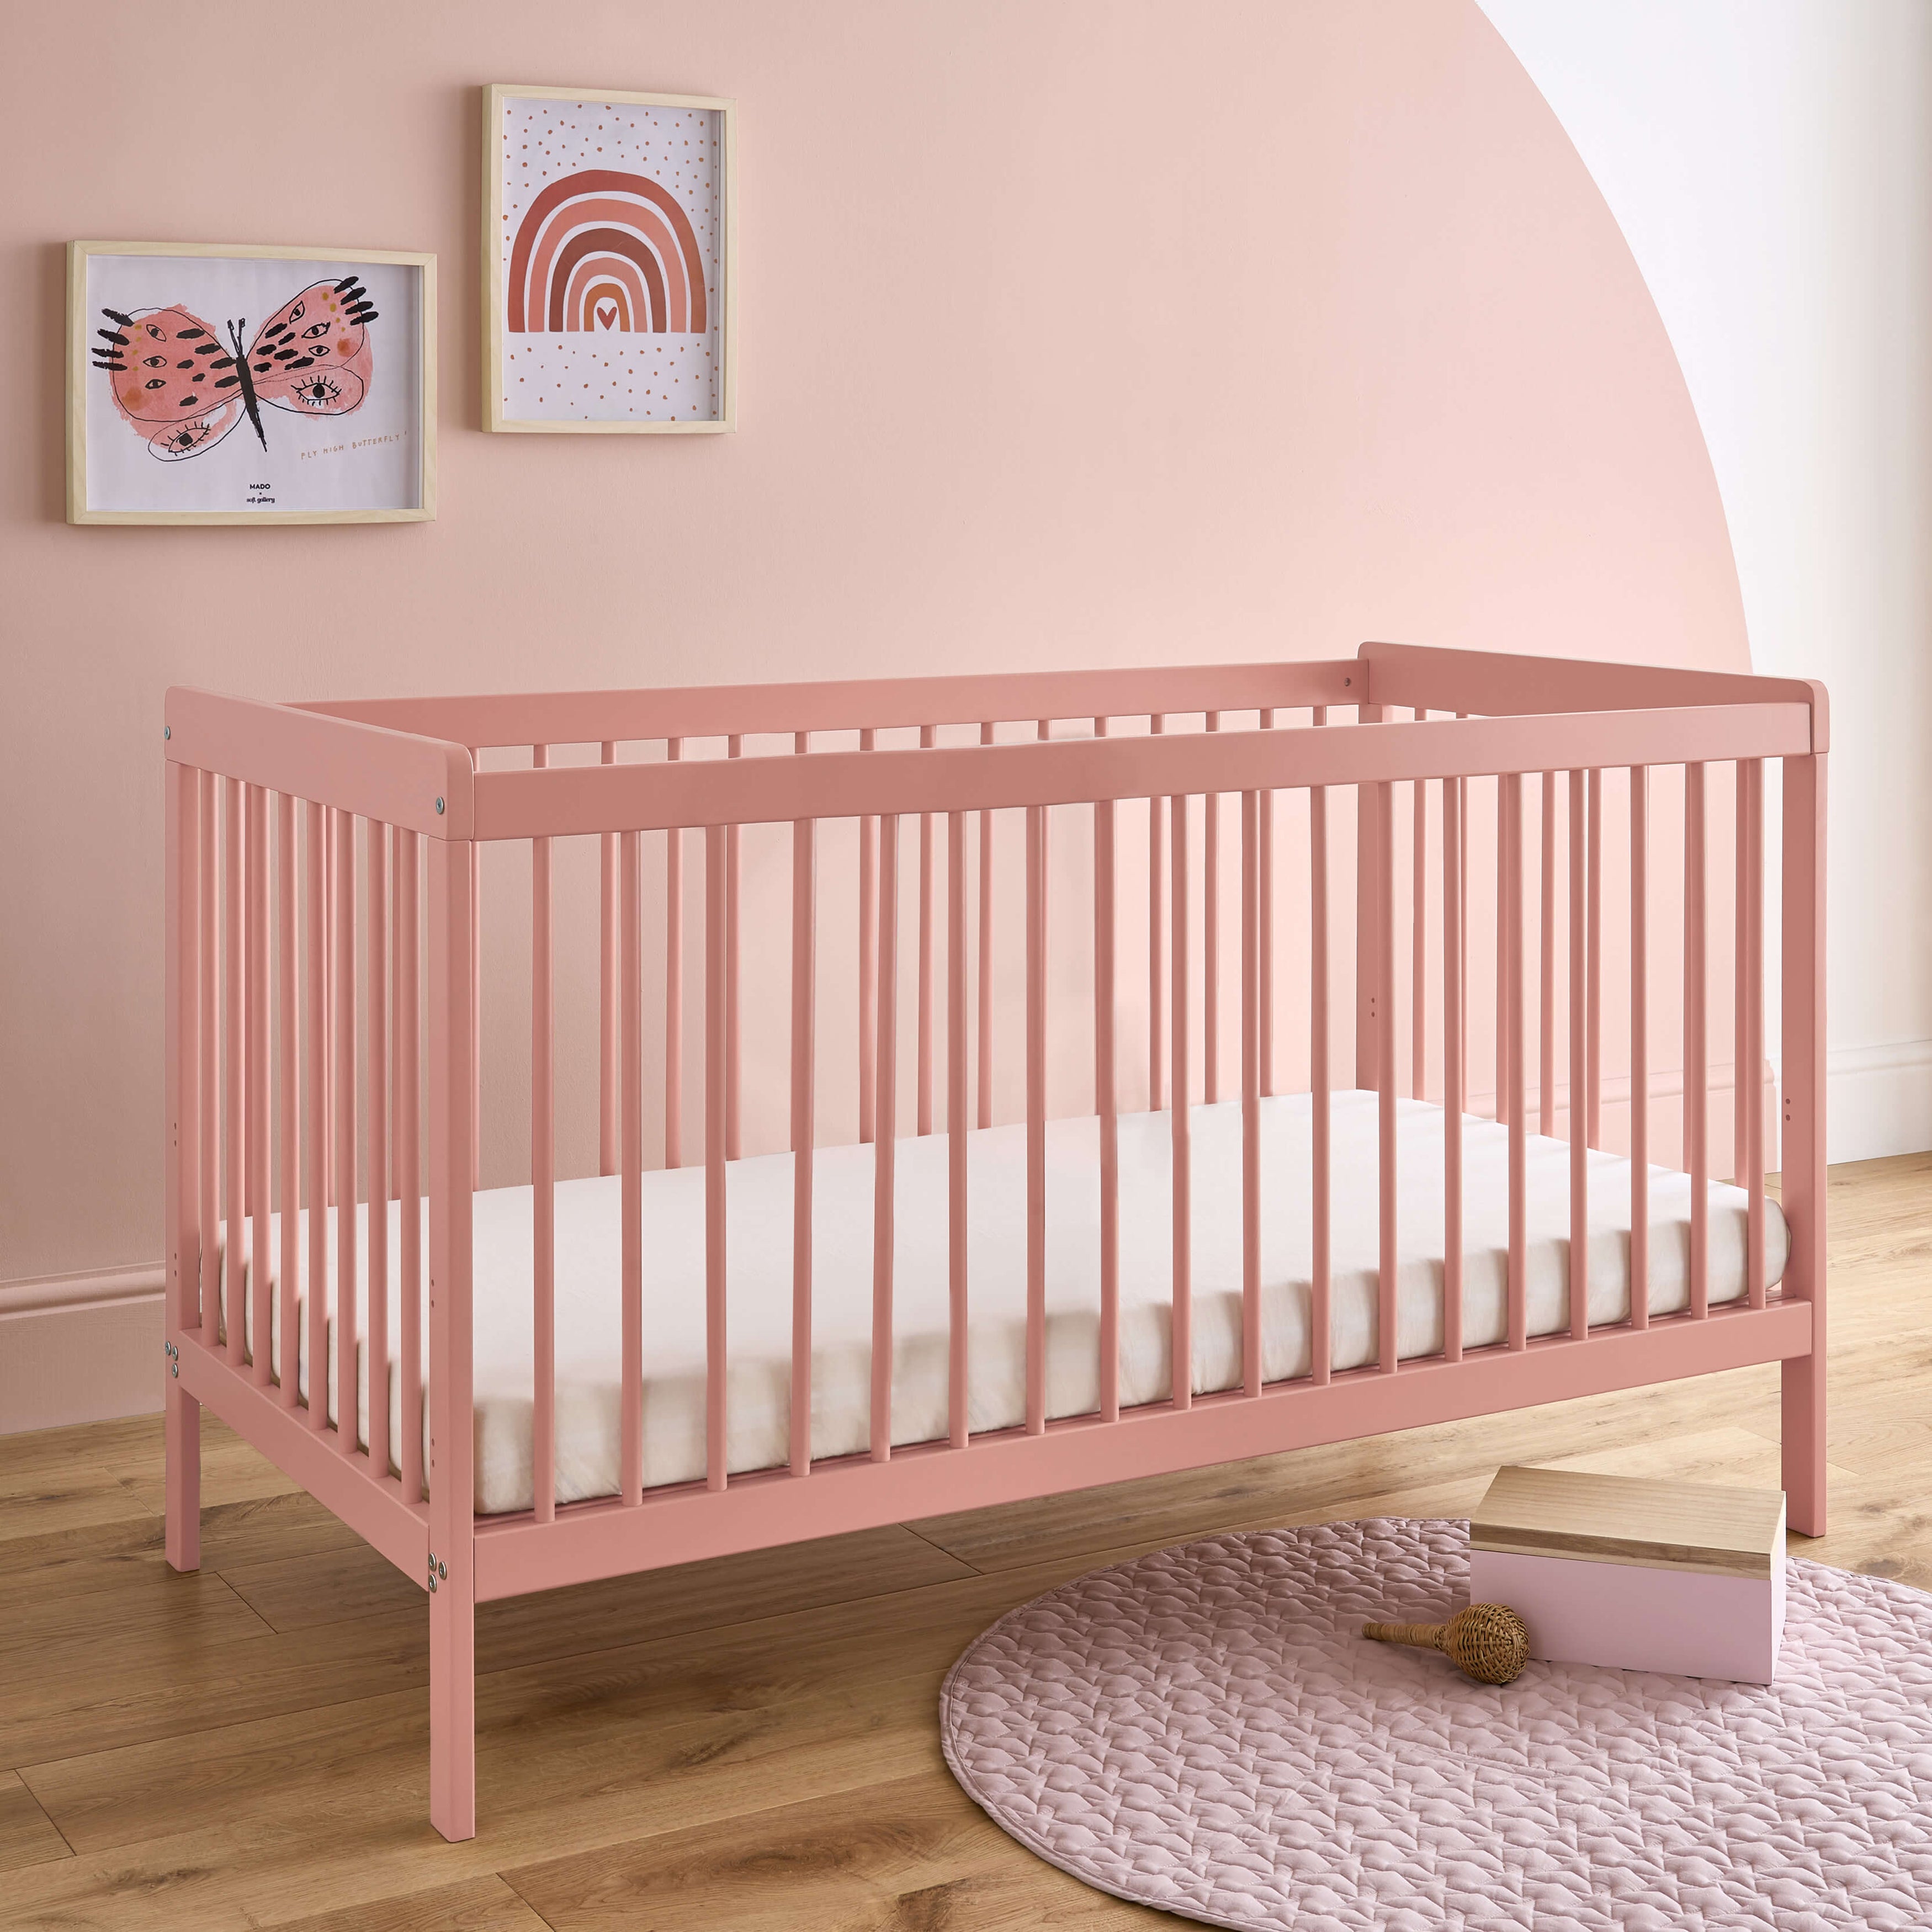 CuddleCo Nola Cot Bed, Painted Pine